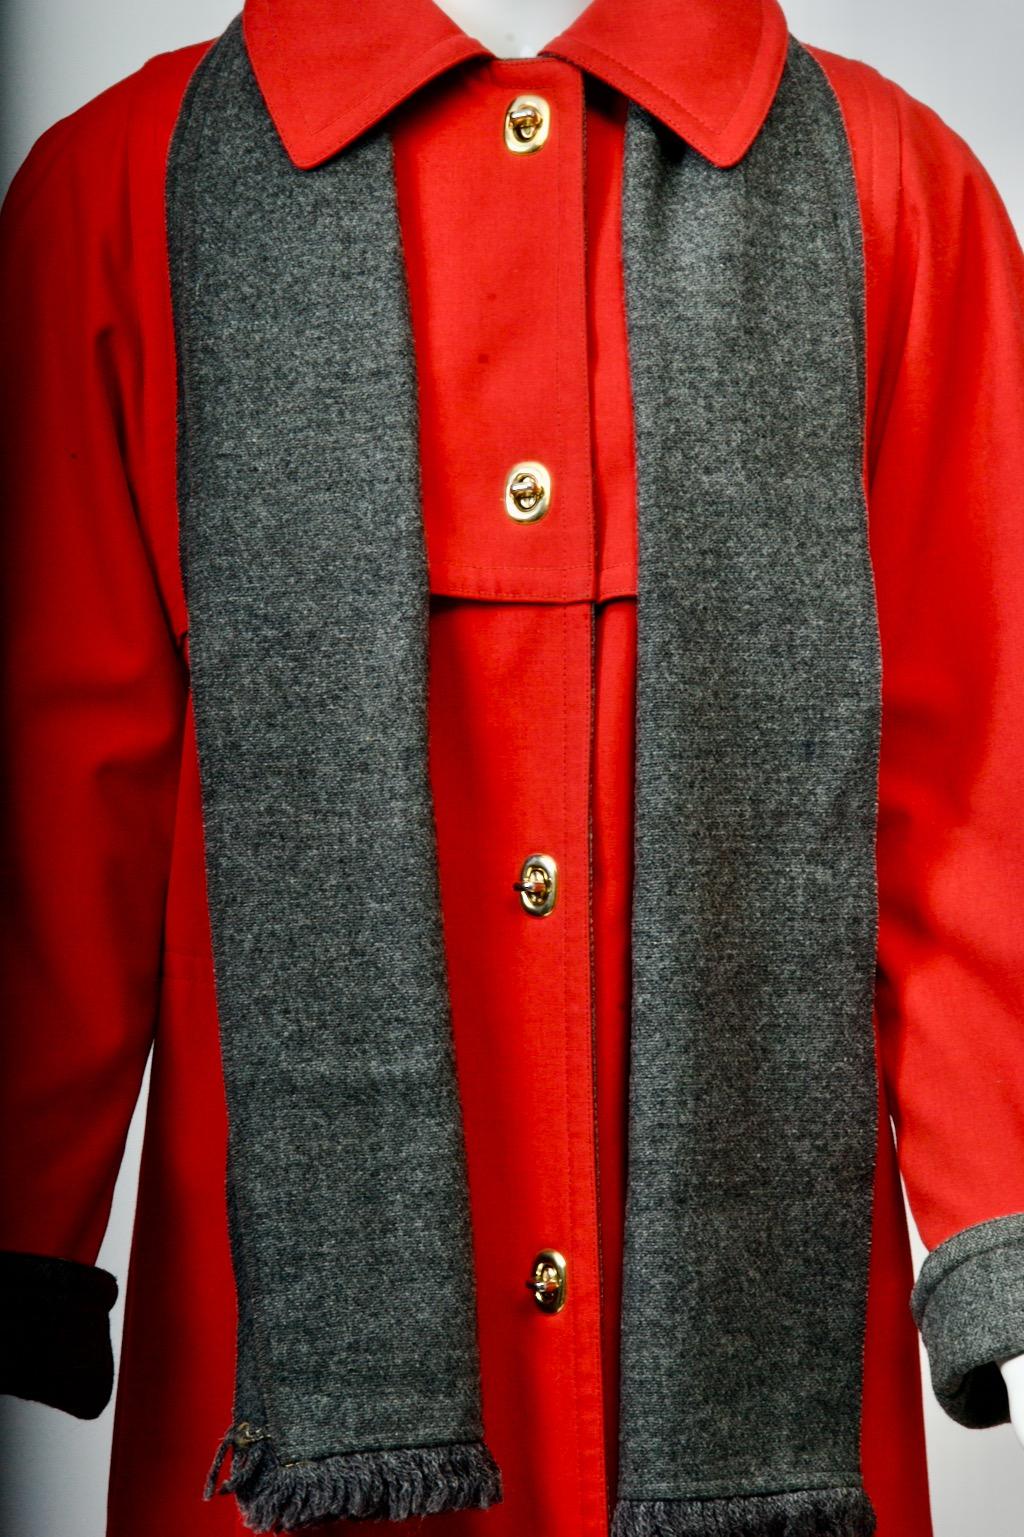 An original c.1970s Bonnie Cashin all-weather coat in red poplin, lined in charcoal wool, and with attached charcoal wool scarf. The coat features Cashin's signature toggle closures and has yoke detailing front and back. Side slit pockets. Cuffs can